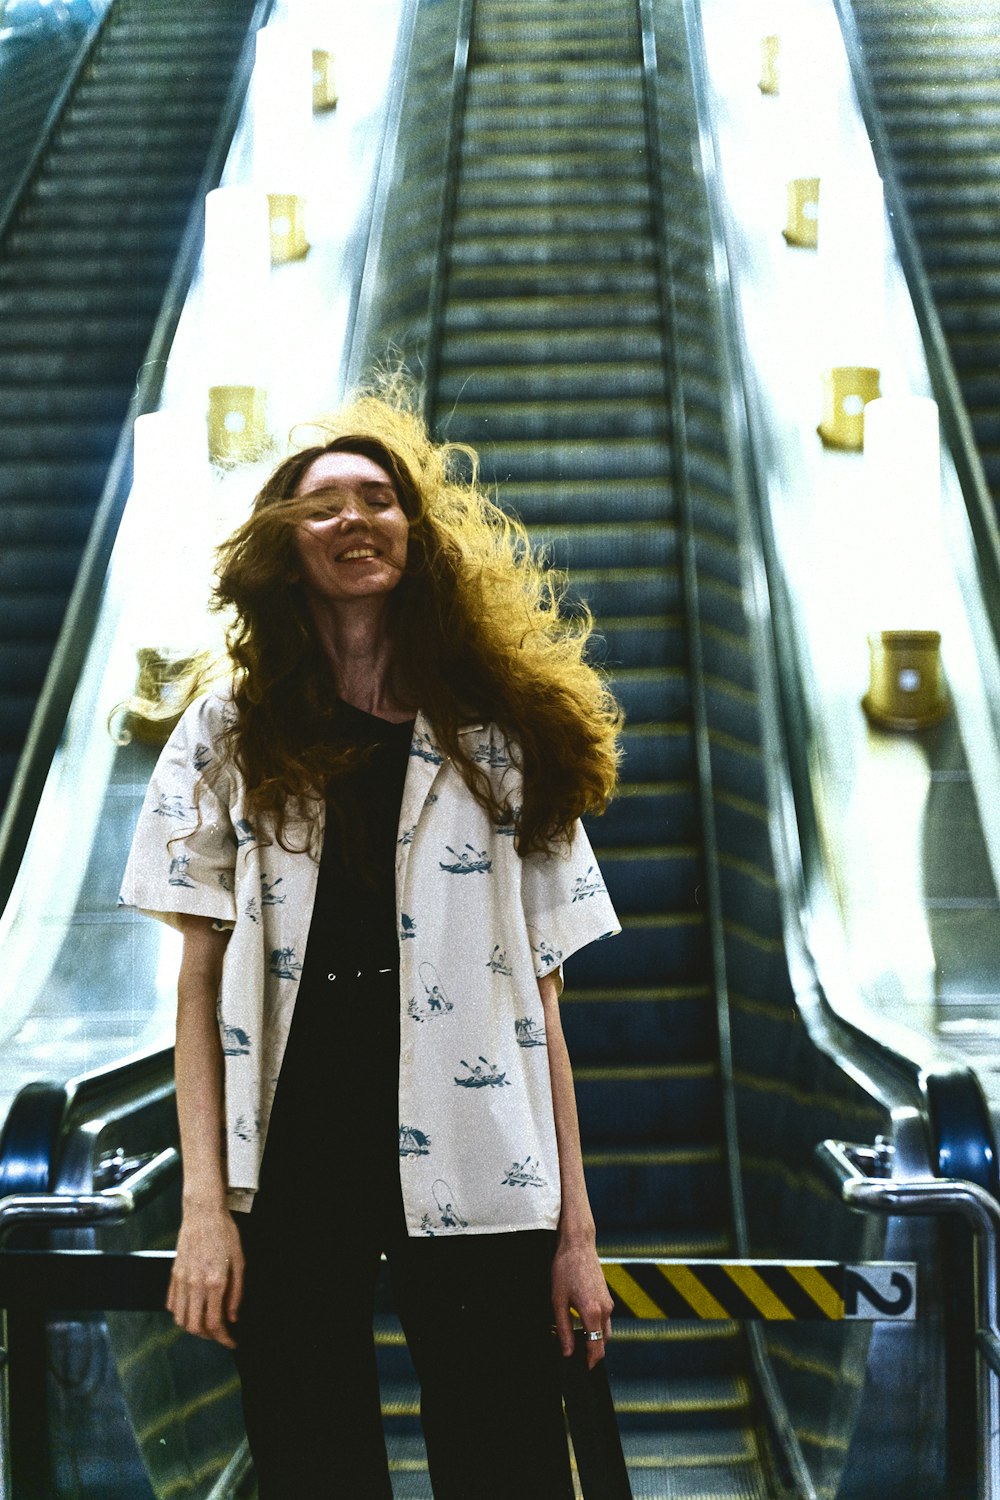 a woman standing in front of an escalator